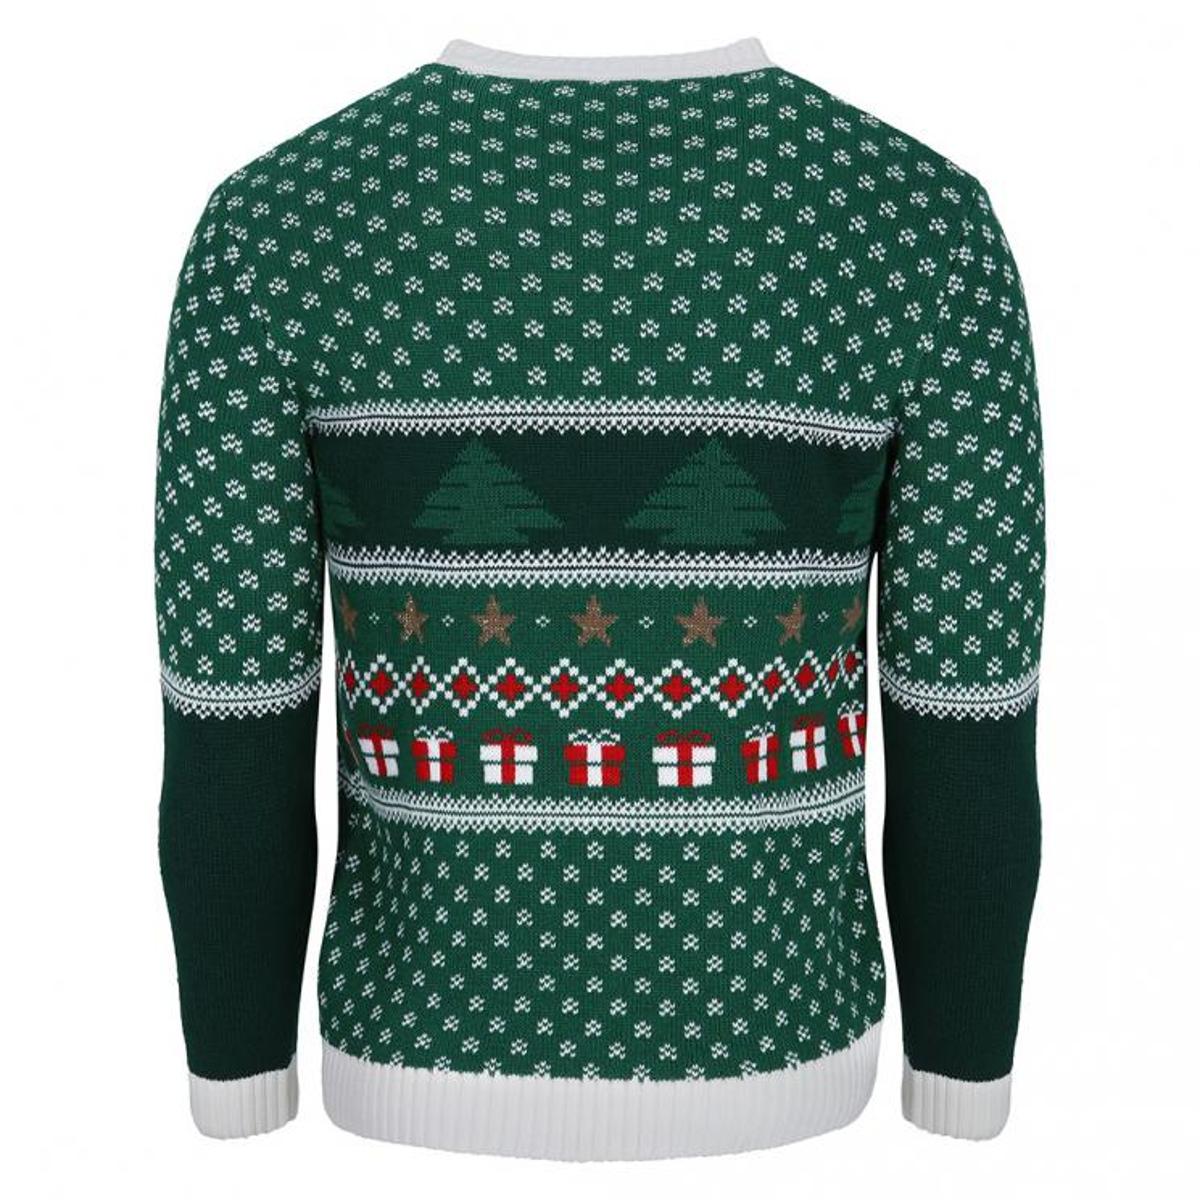 Juventus Fc Blue Christmas Sweater For Men And Women